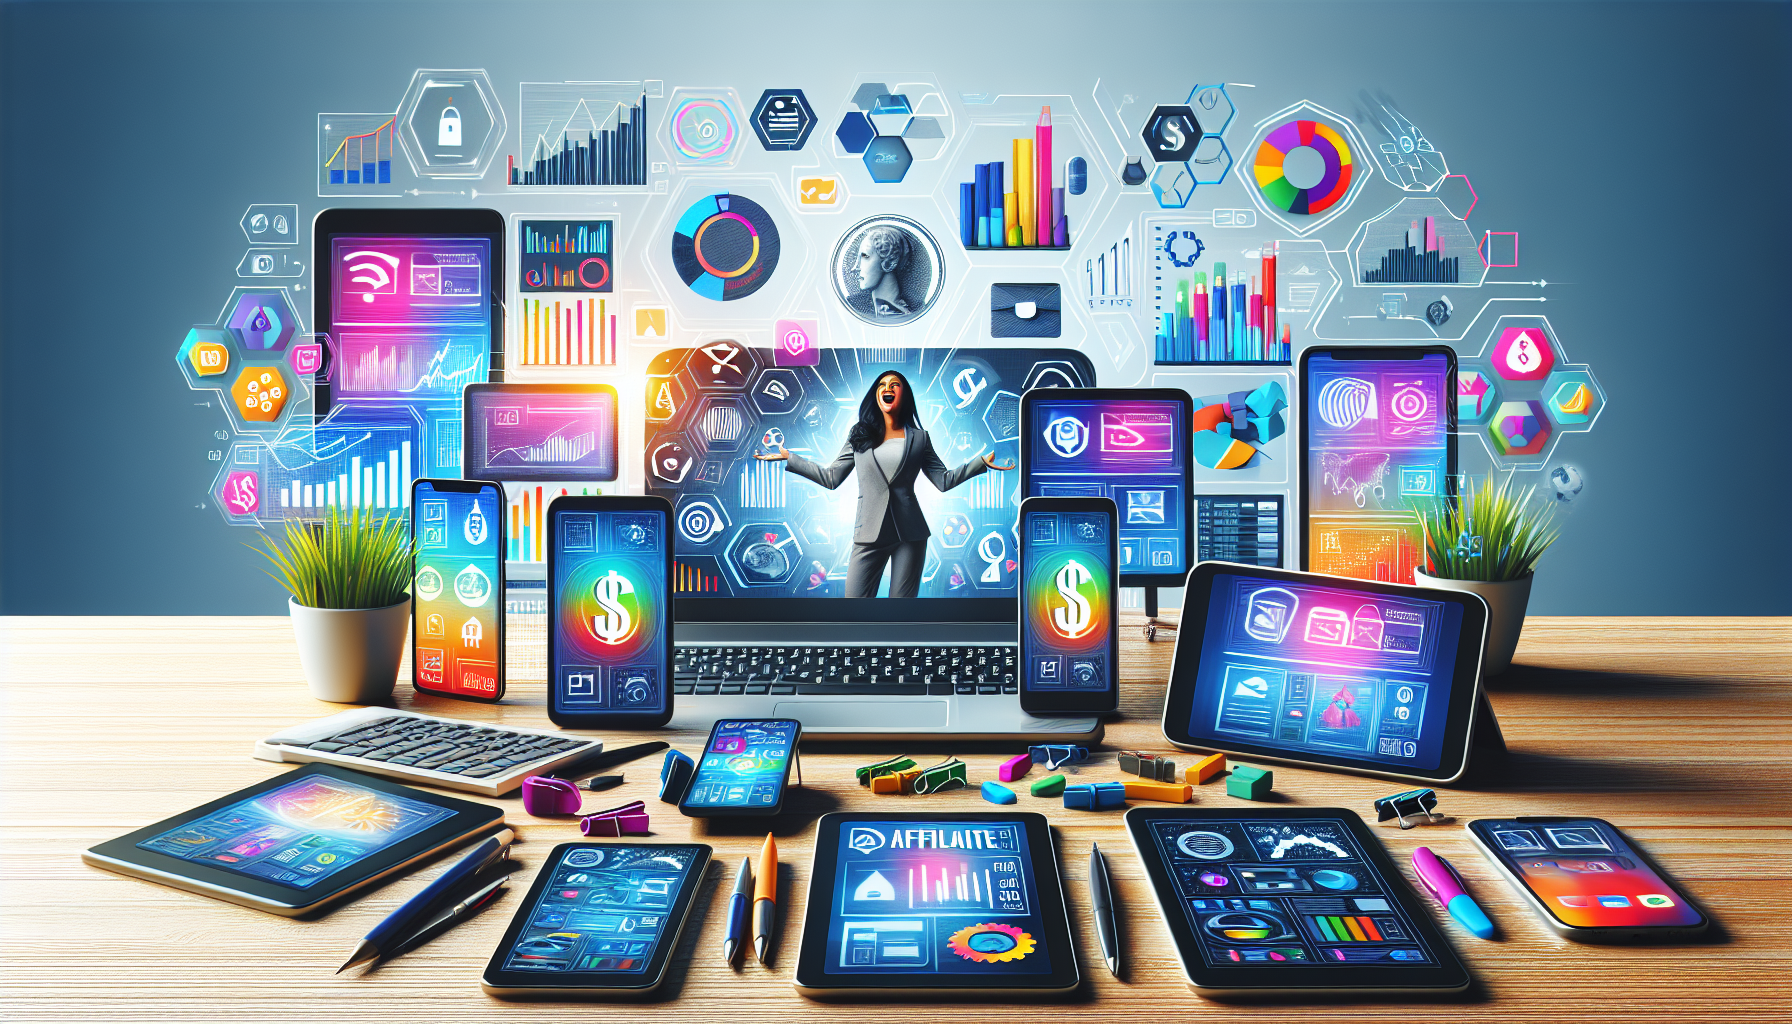 Create an image showcasing a variety of digital devices like laptops, smartphones, and tablets on a sleek workspace, with various affiliate marketing elements such as analytics graphs, dollar signs, a